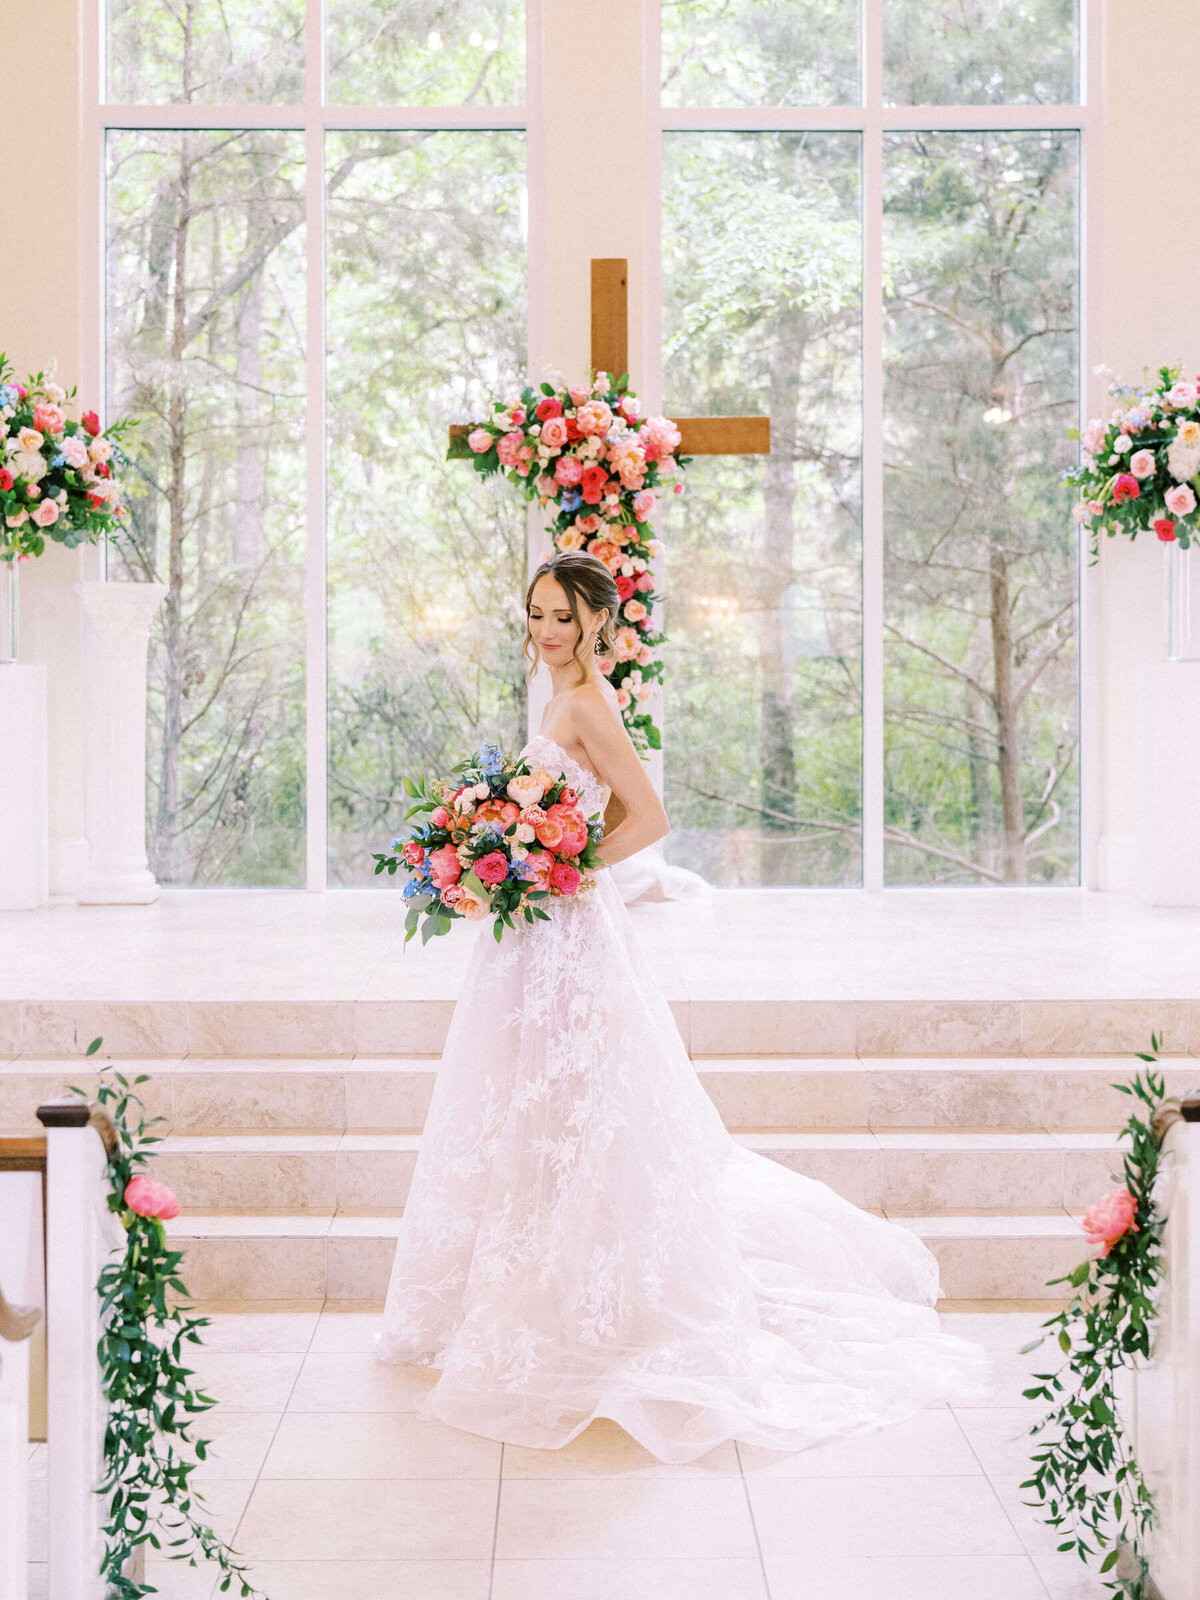 Dallas bride stands in wedding chapel surrounded by colorful vibrant florals in Monique Lhuillier dress